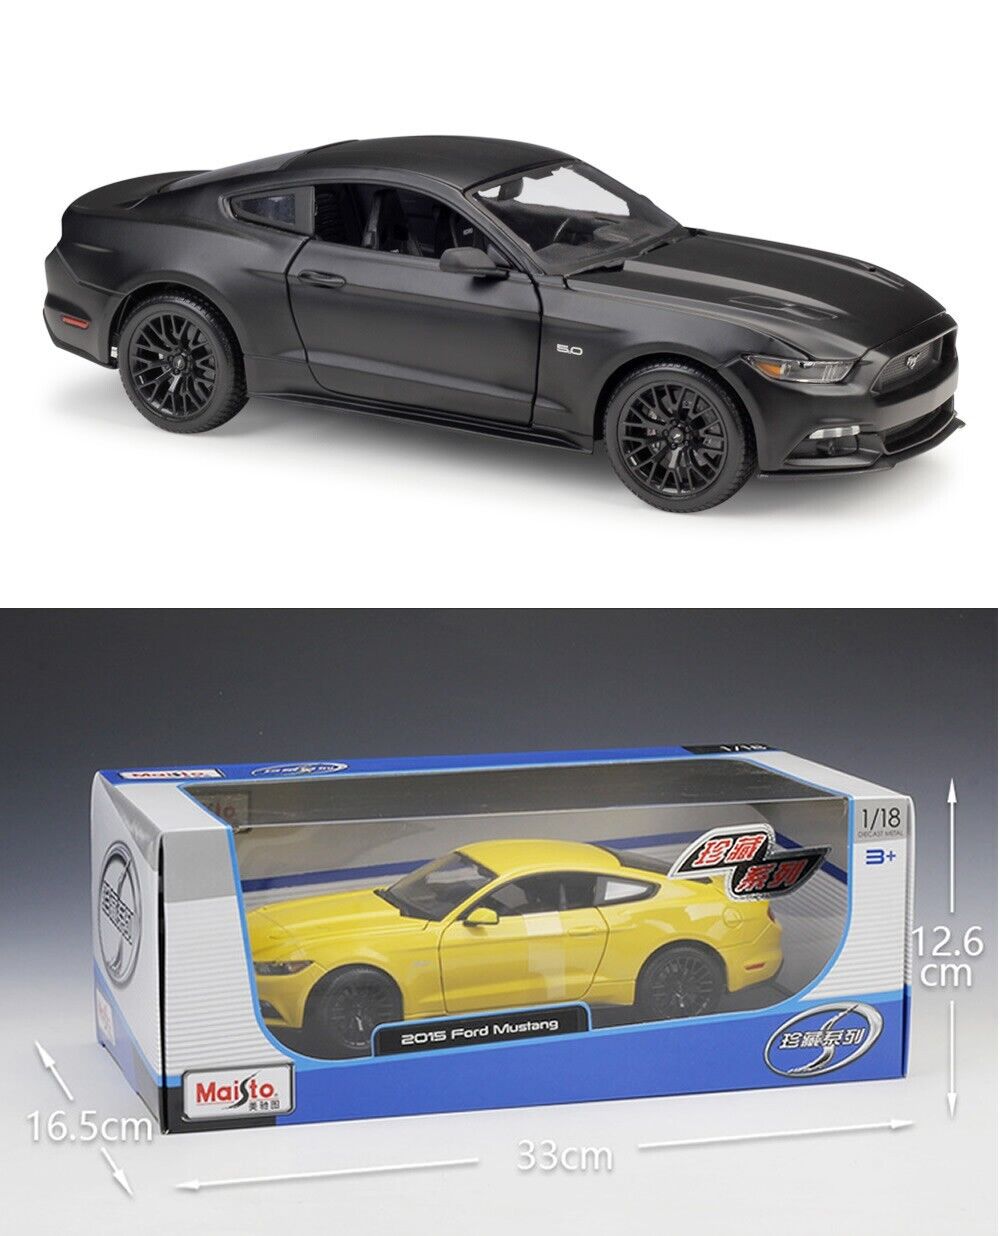 Maisto 1:18 2015 Ford Mustang GT Diecast vehicle Car MODEL Gift Collection